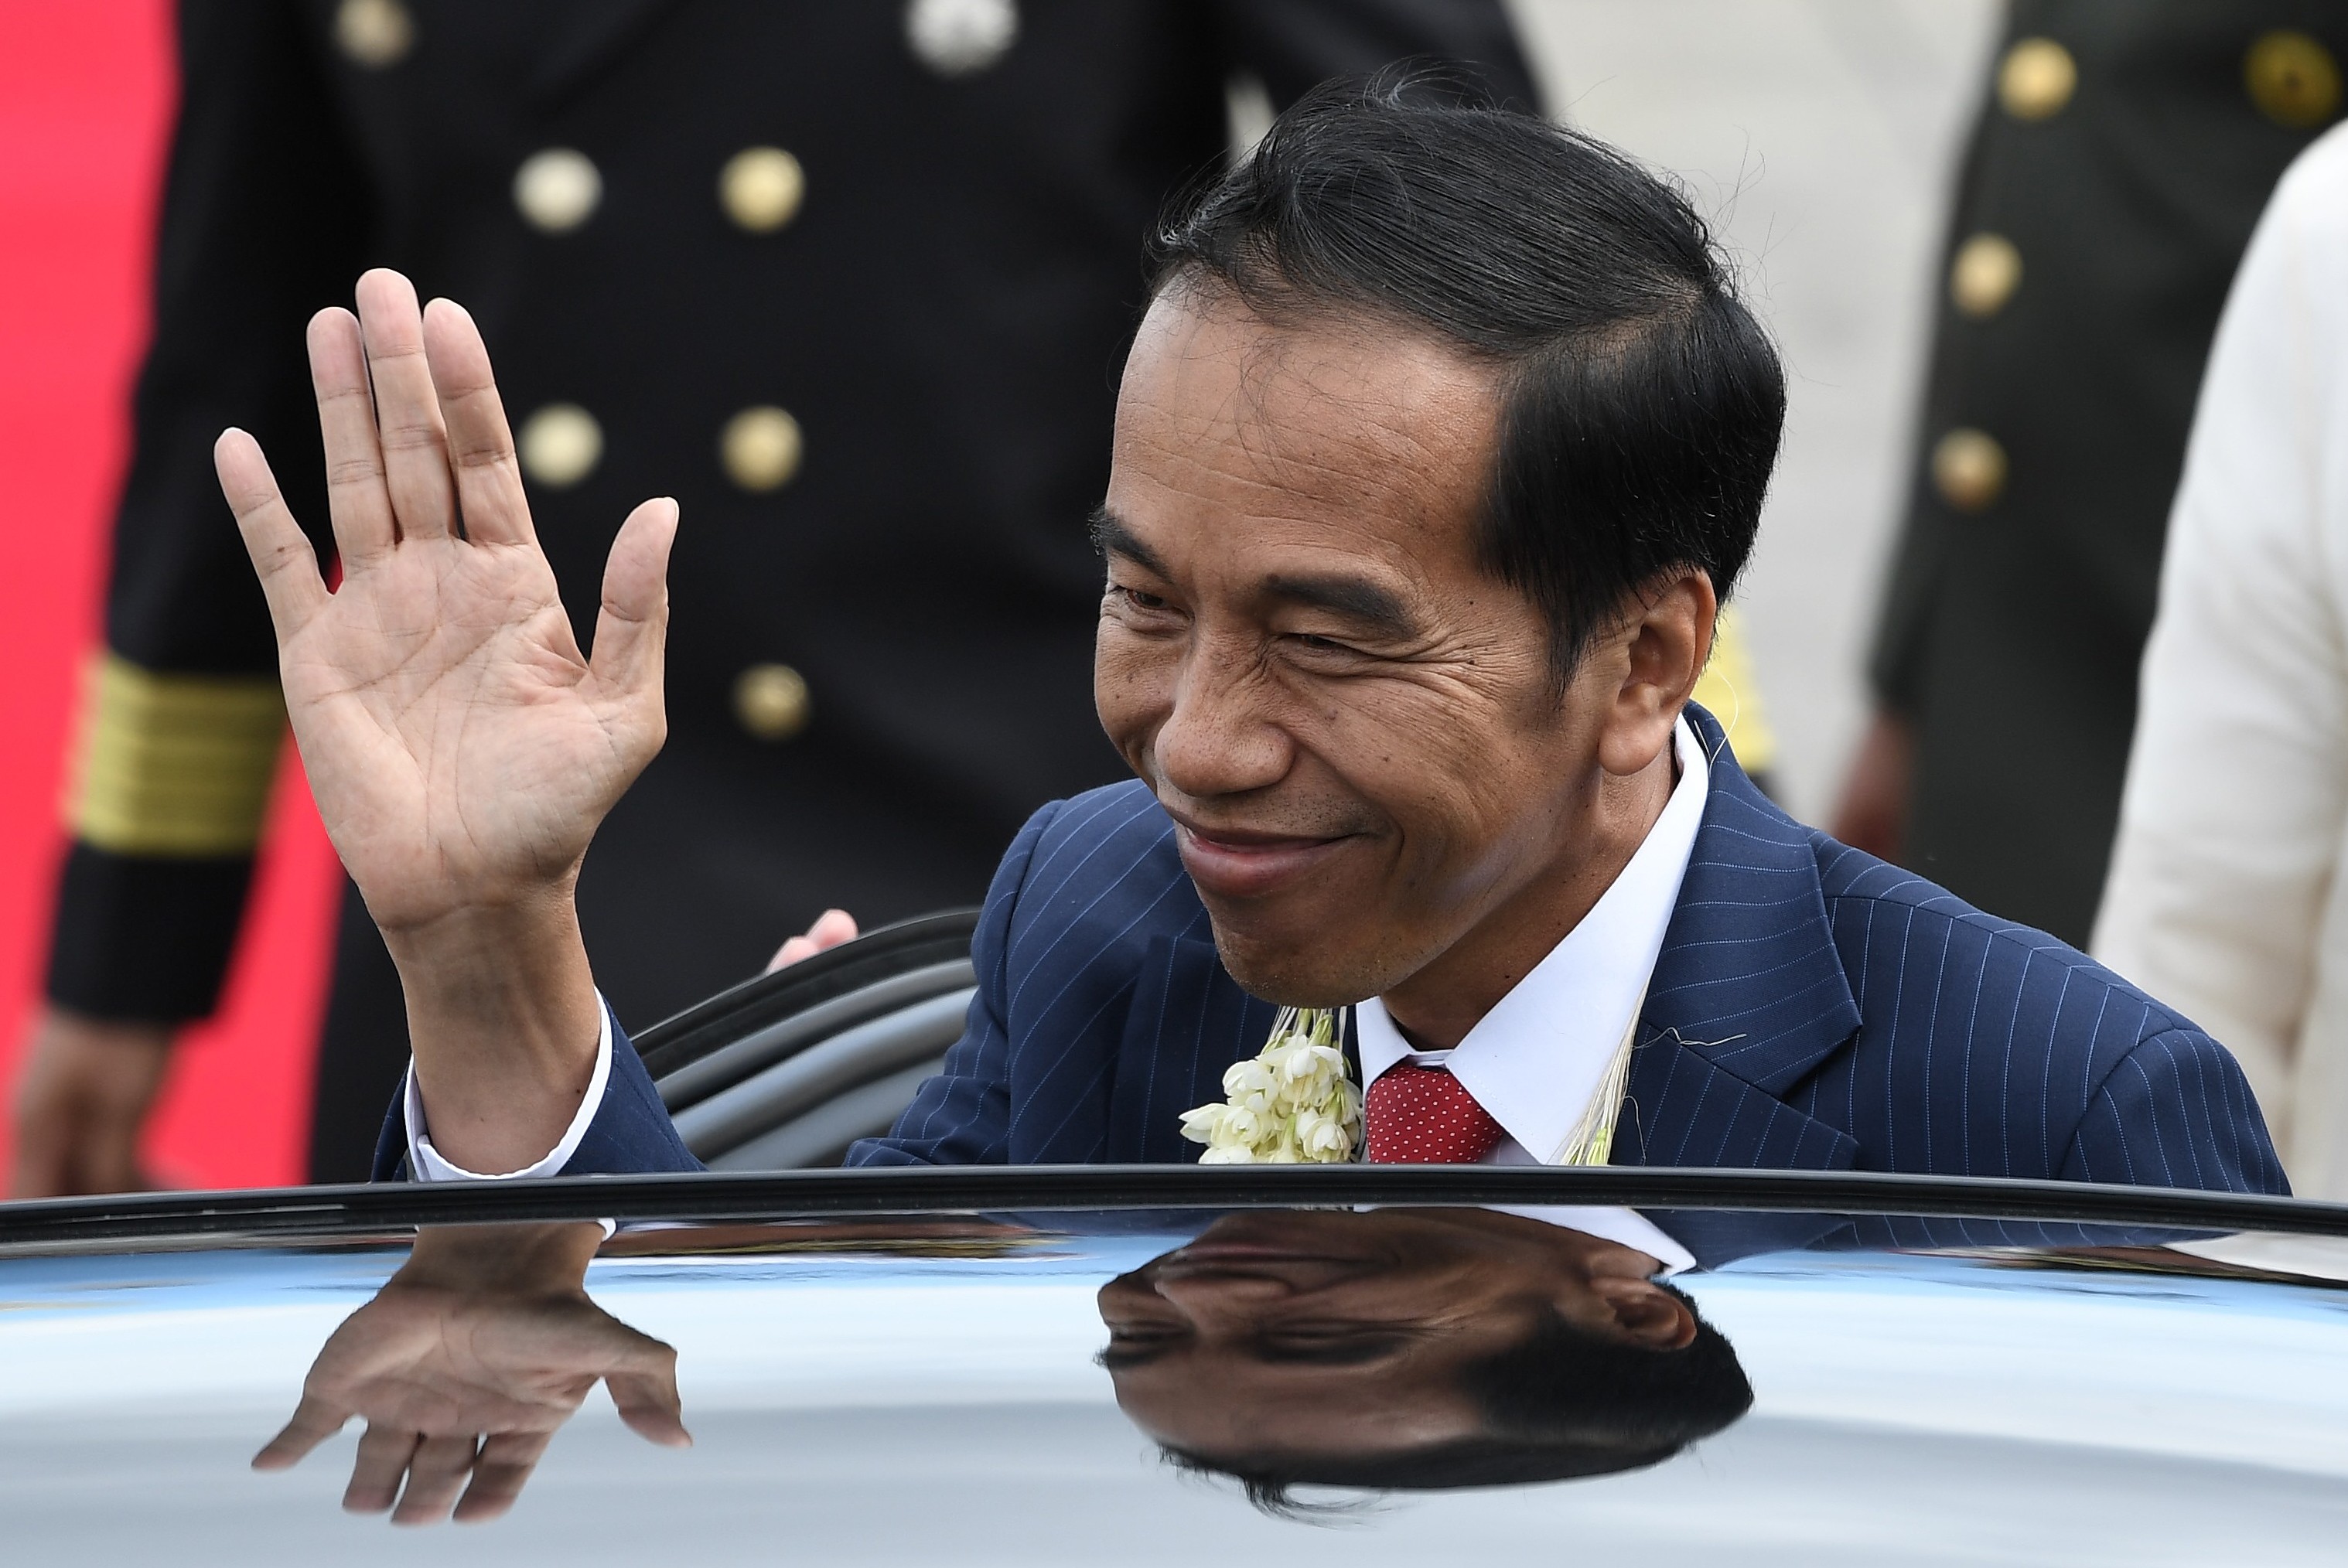 Indonesia's President Joko Widodo hopes to land a second five-year term at the next election. But he must balance public opinion of his relationship with China, a slow moving infrastructure plan and an influx of Chinese workers. Photo: AFP